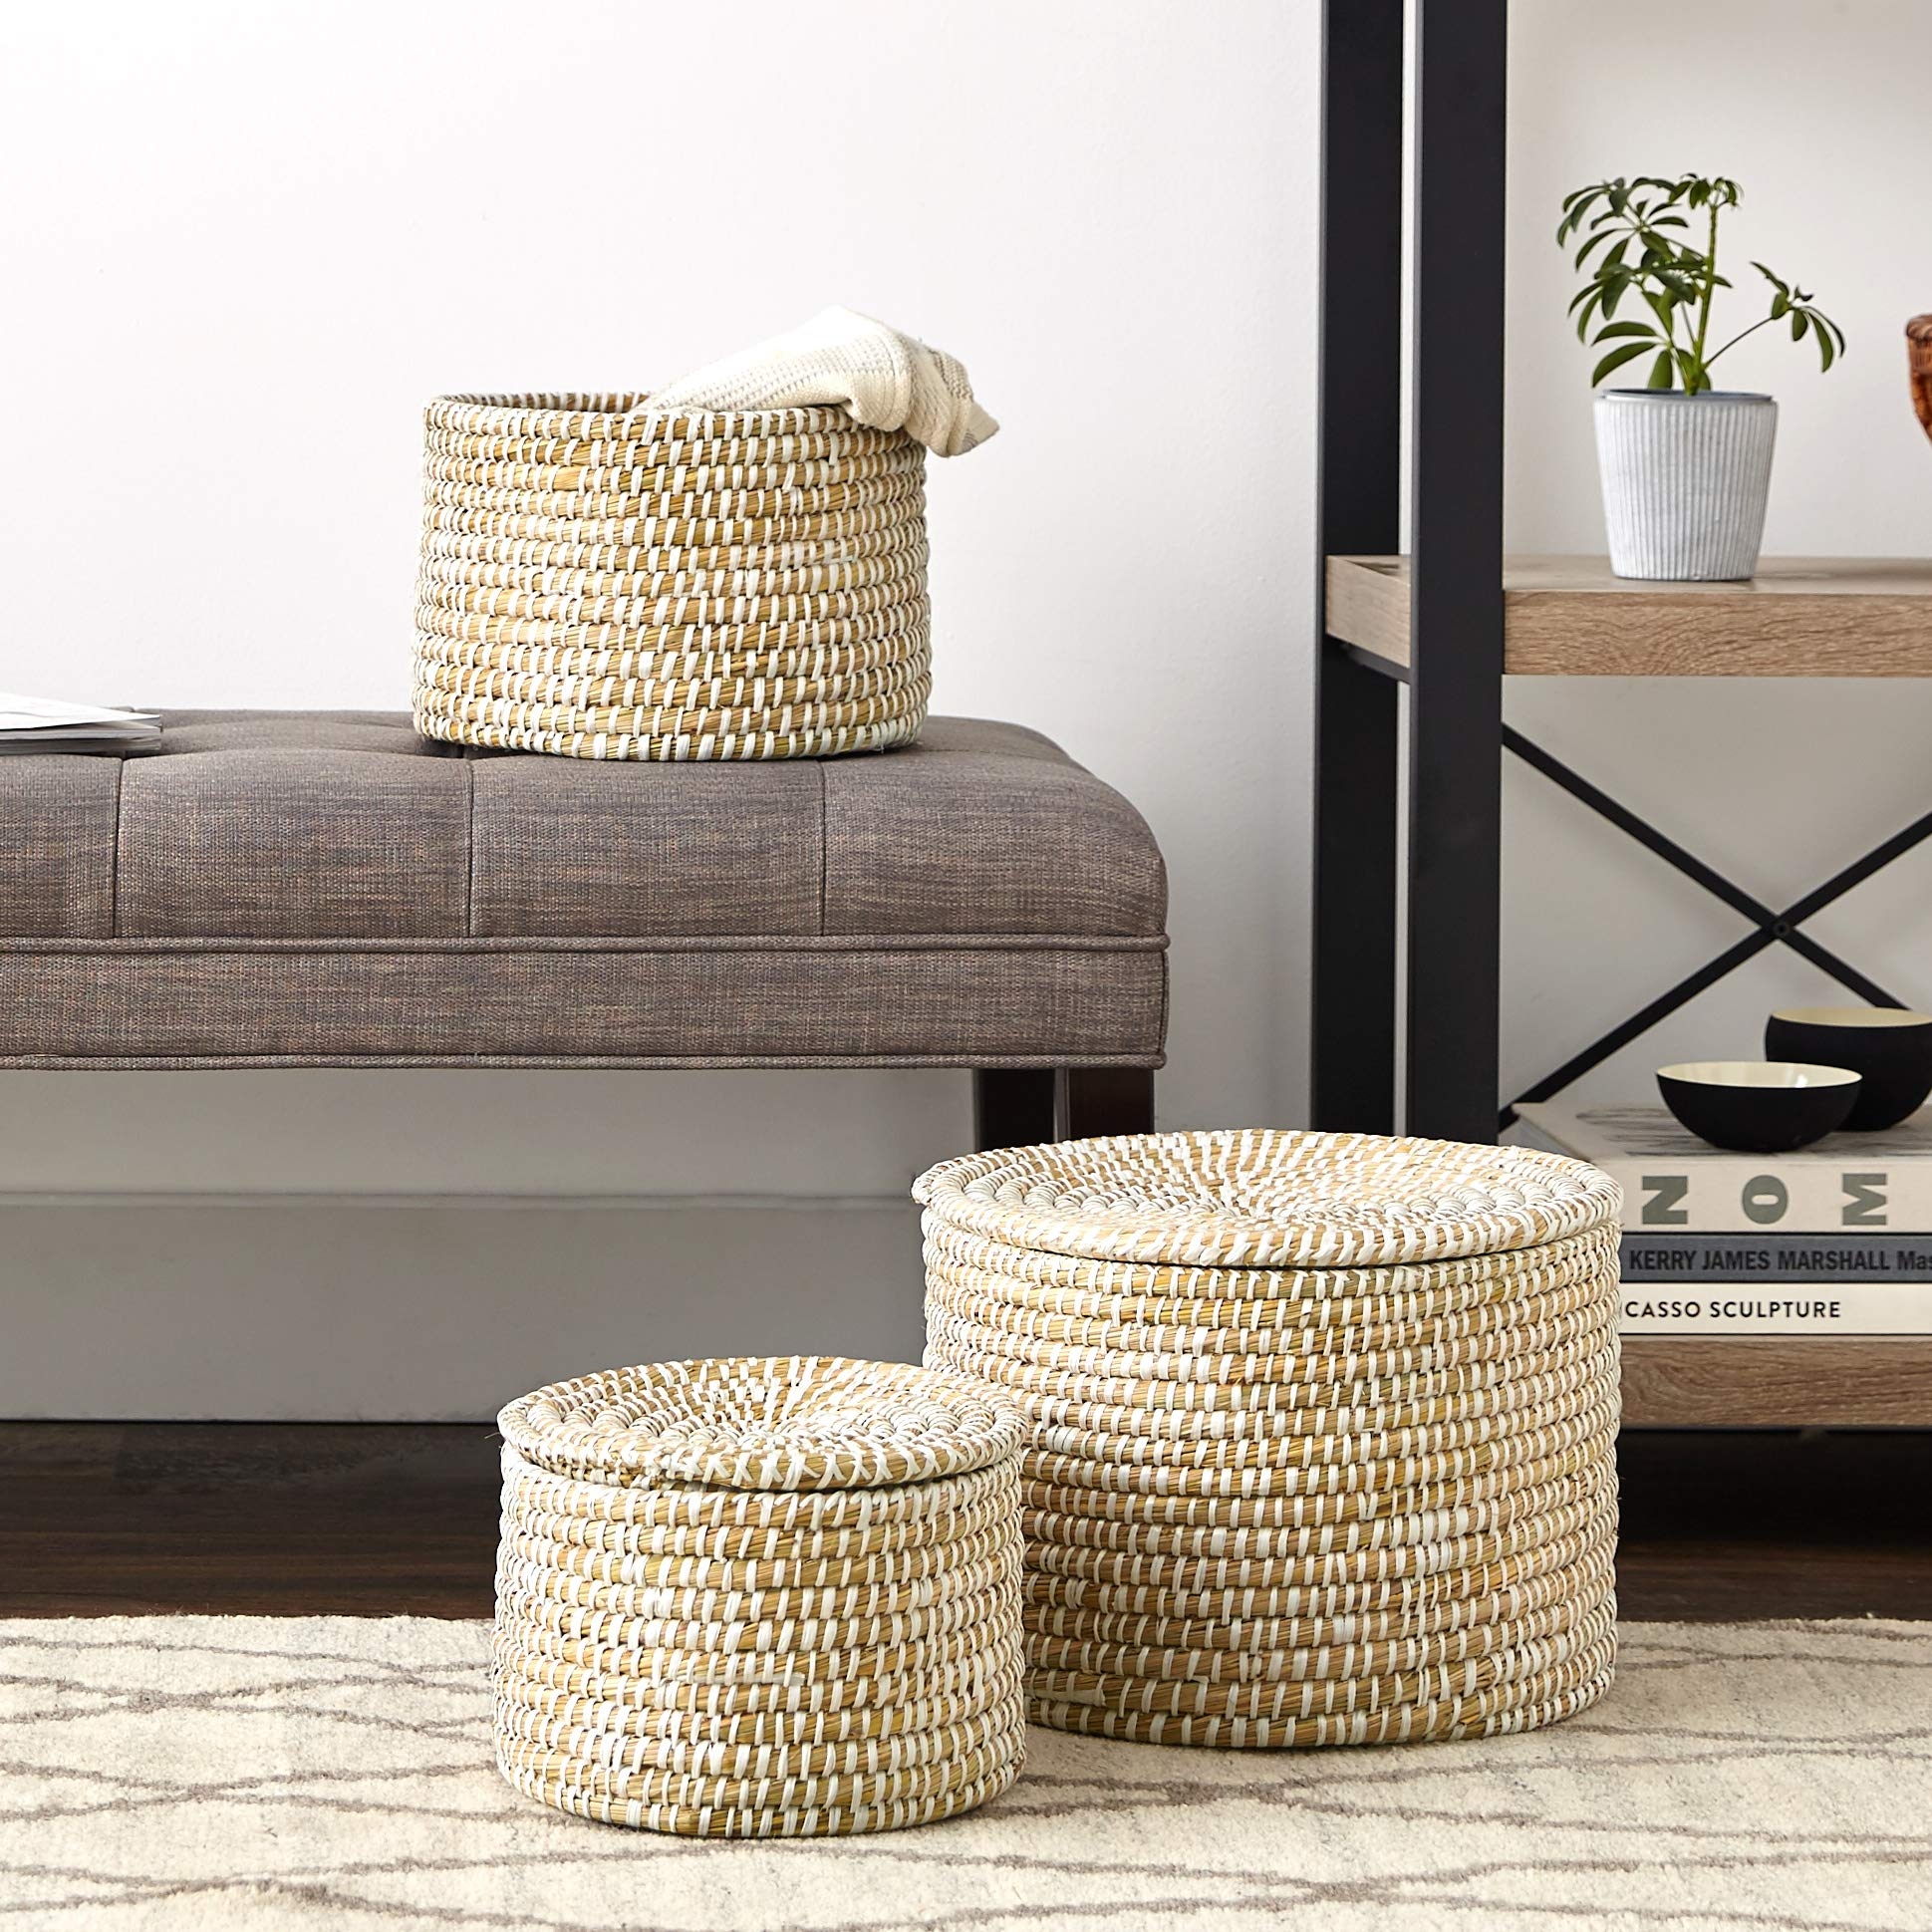 Whitewashed Woven Seagrass Baskets with Lids (Set of 3 Sizes) - Image 4